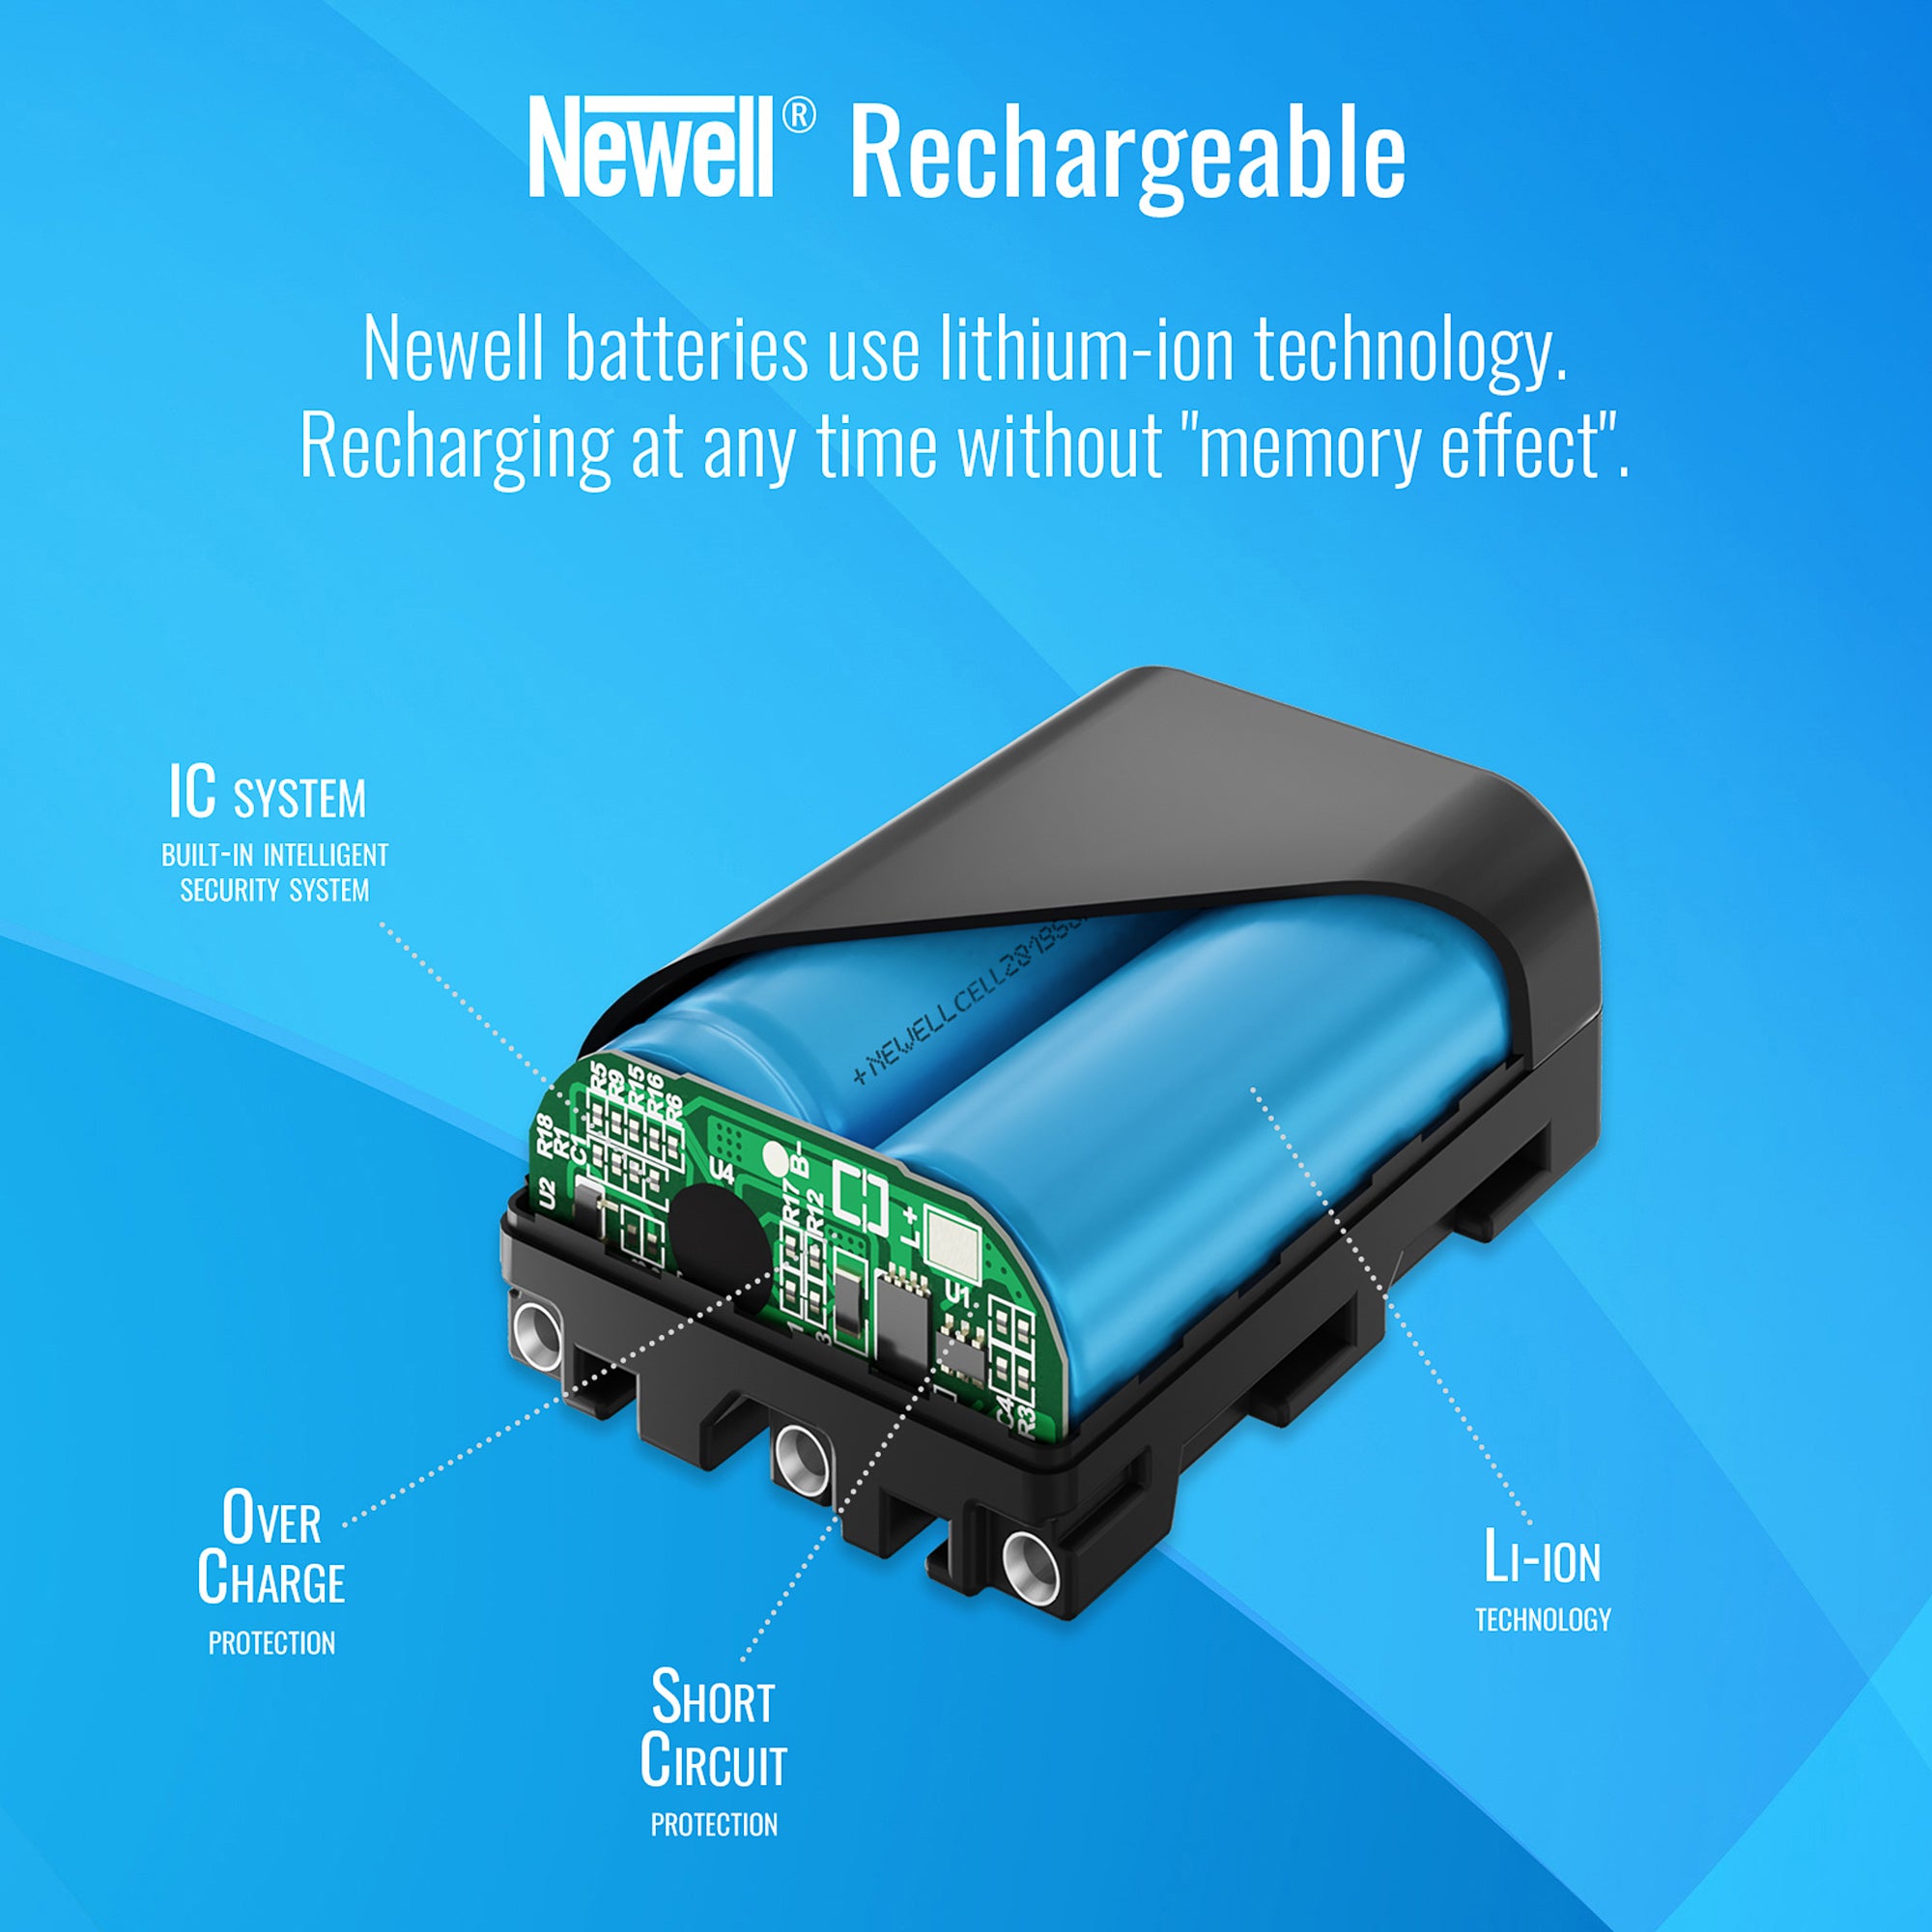 Newell Battery Pack BP-V142 SLIM V-Mount with USB and D-Tap. LED Charge Level Display